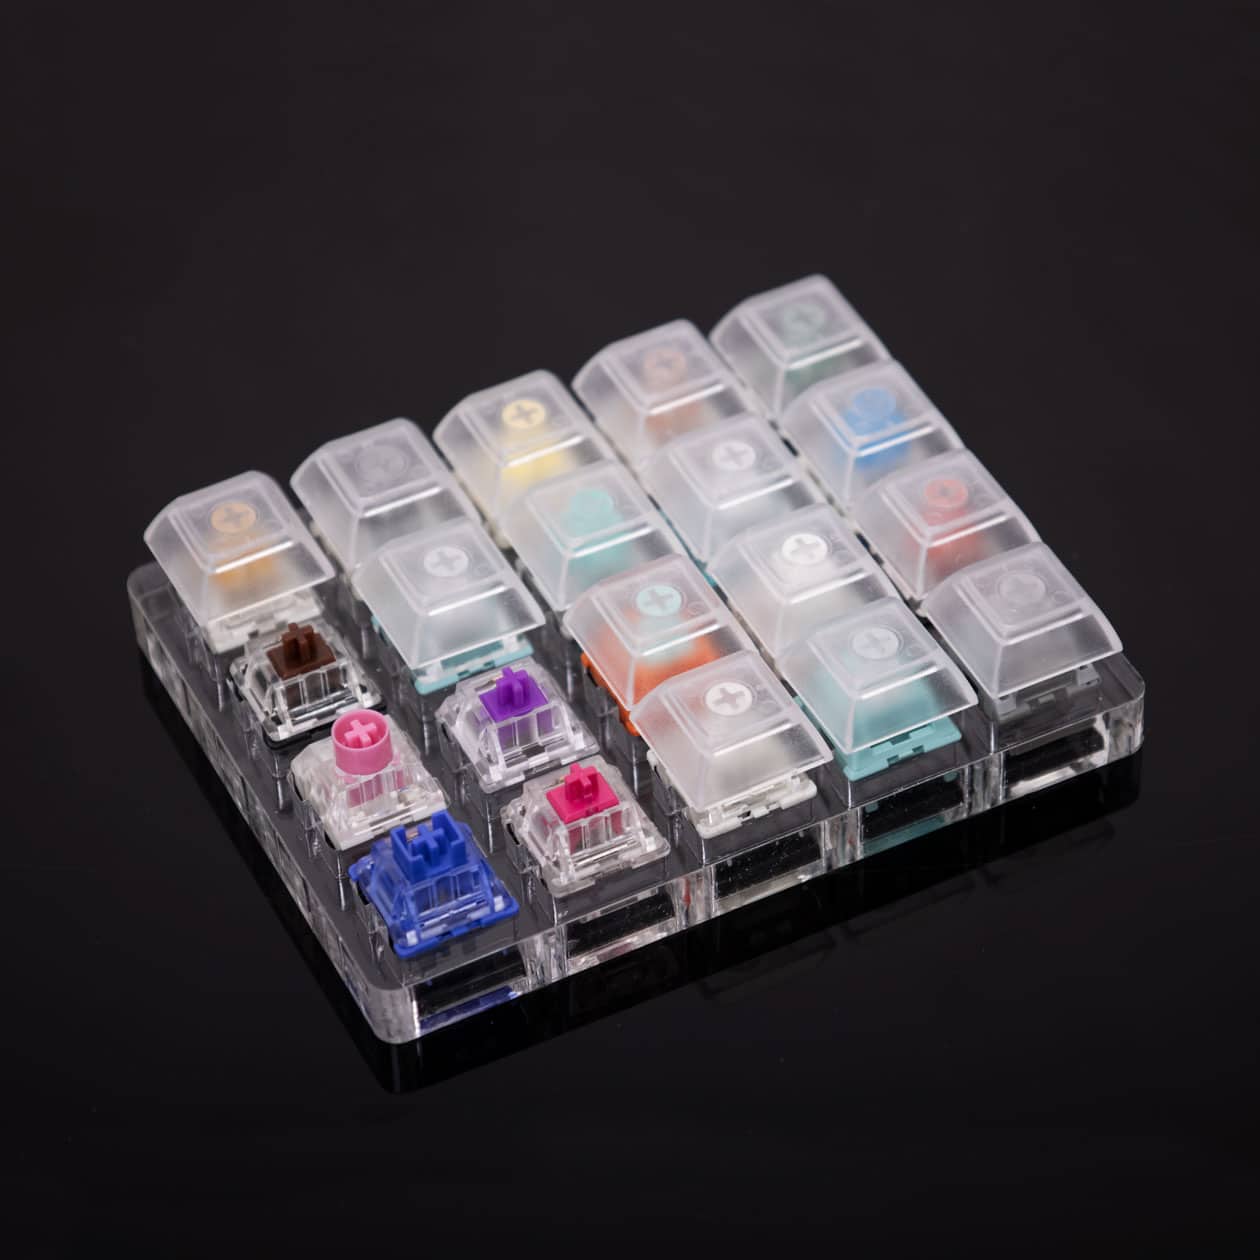 20 Slot Switch Tester (comes with switches)